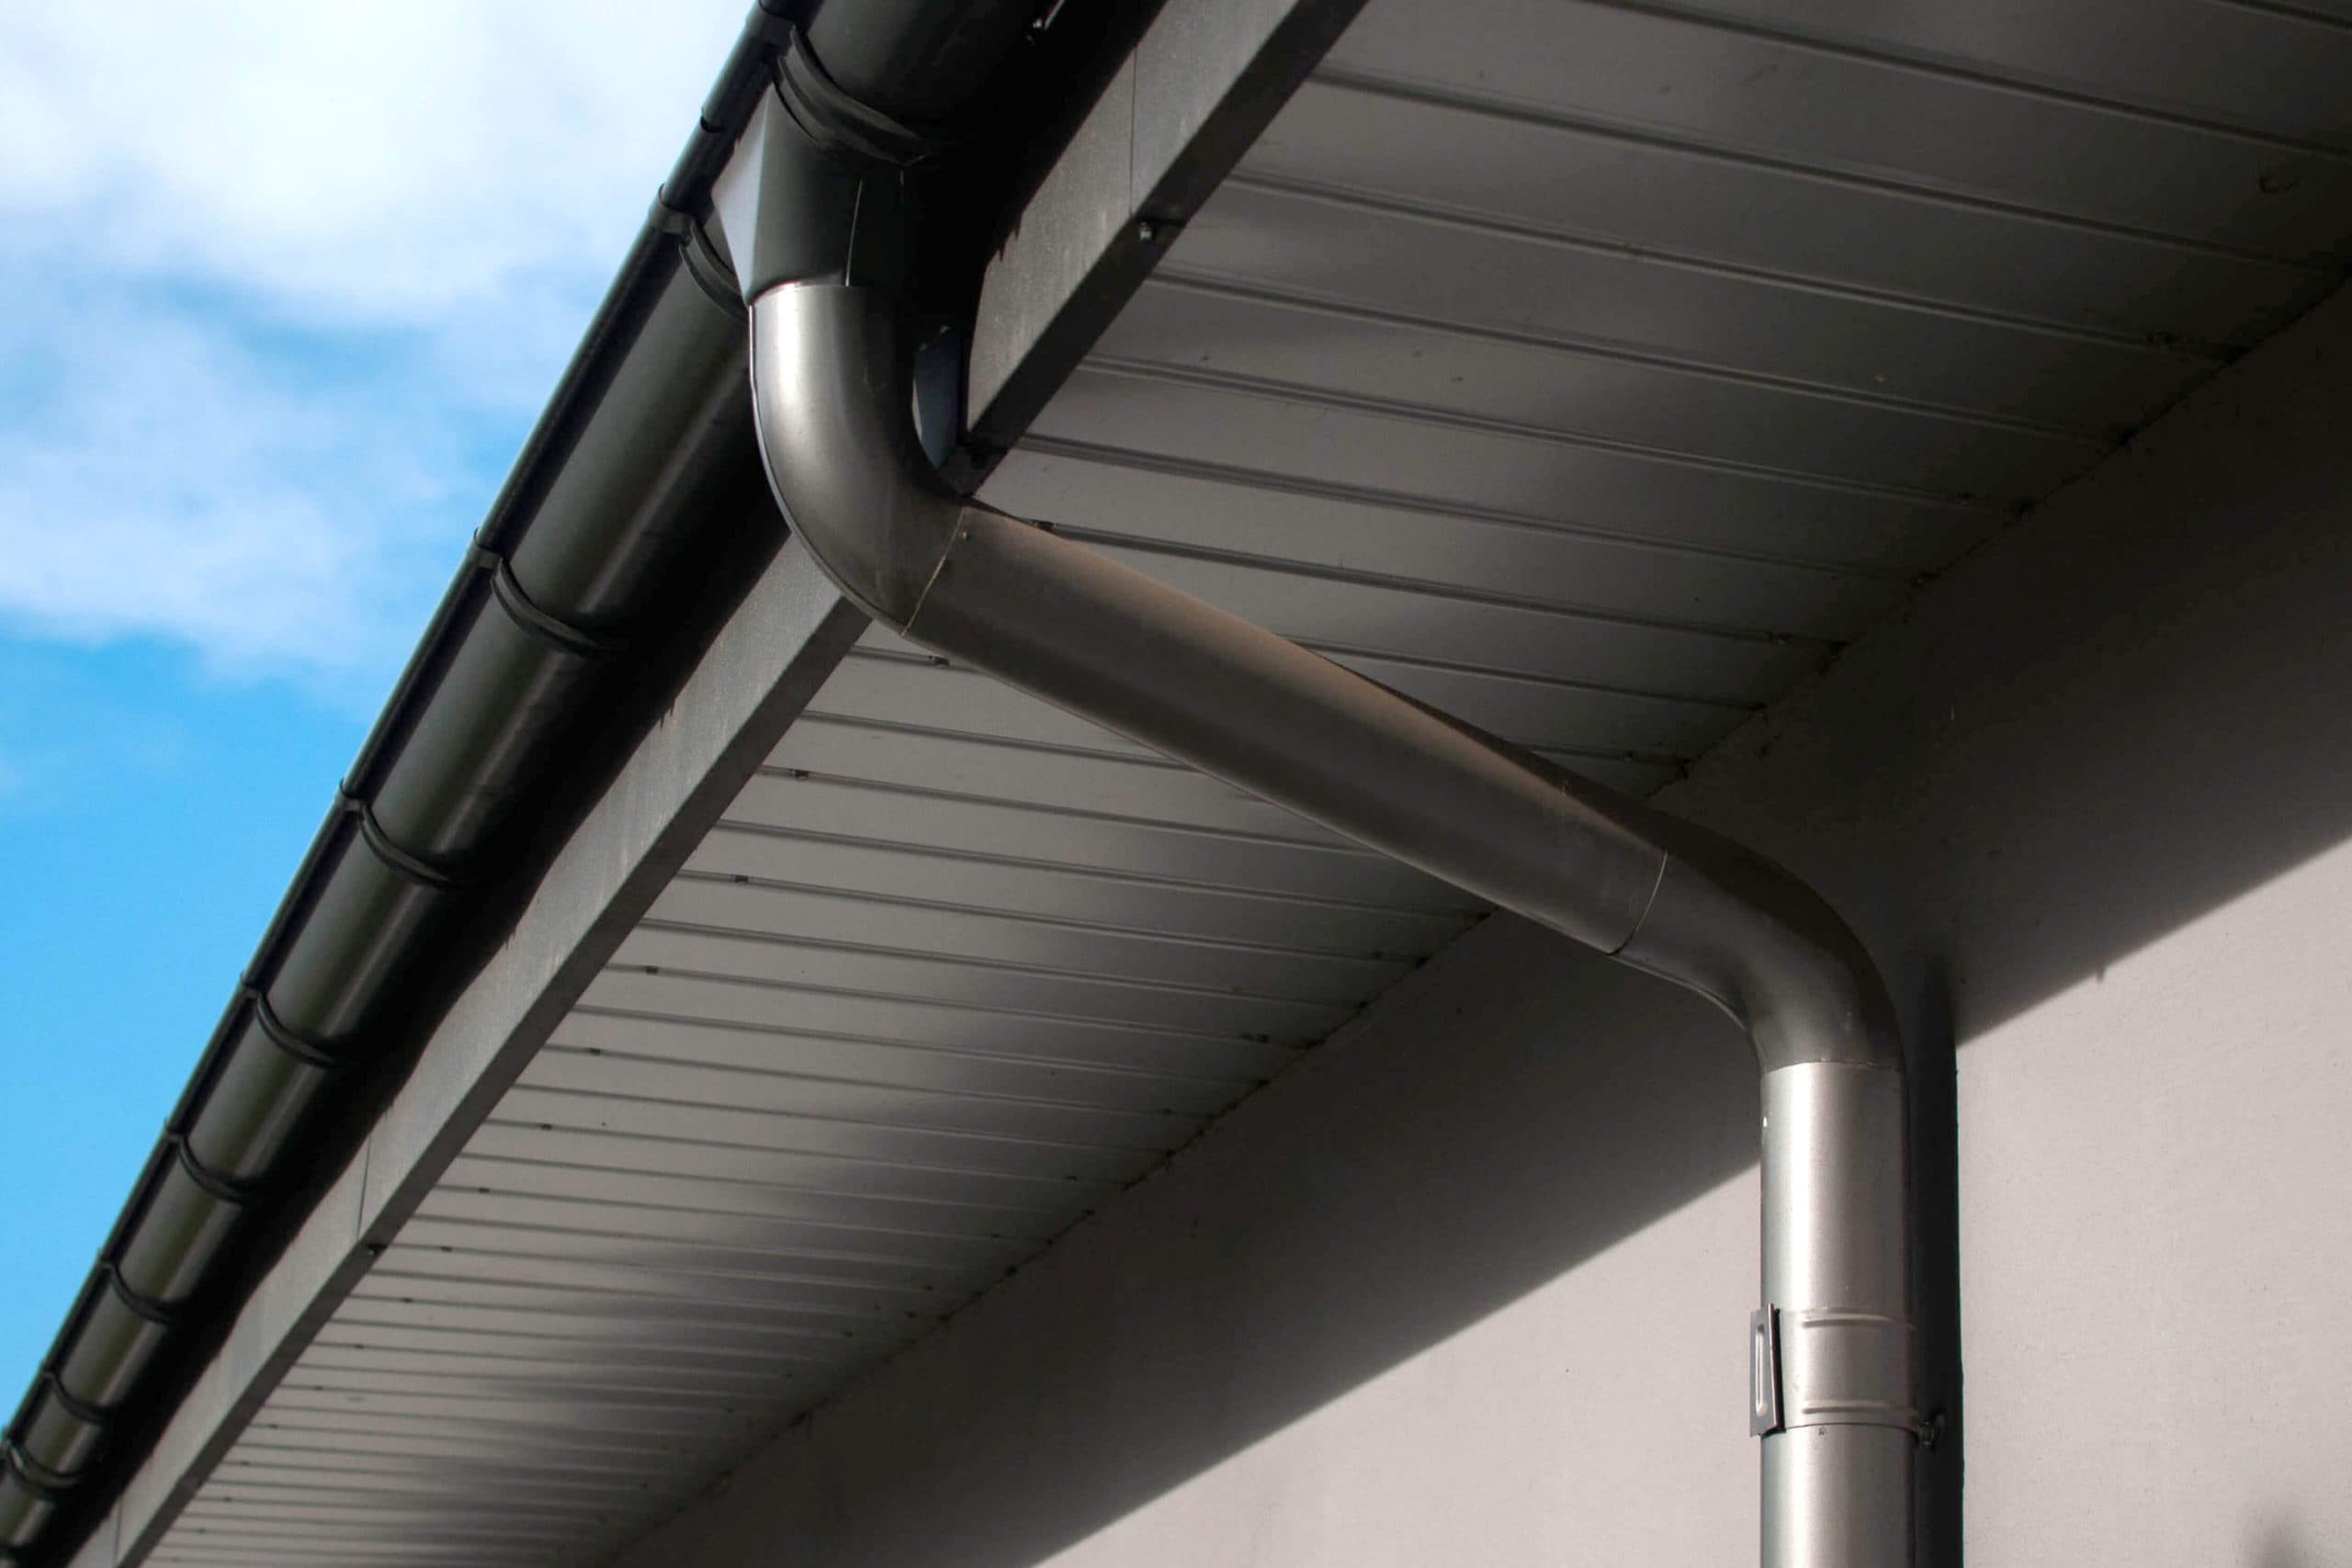 Corrosion-resistant galvanized gutters installed on a commercial building in Williamsburg